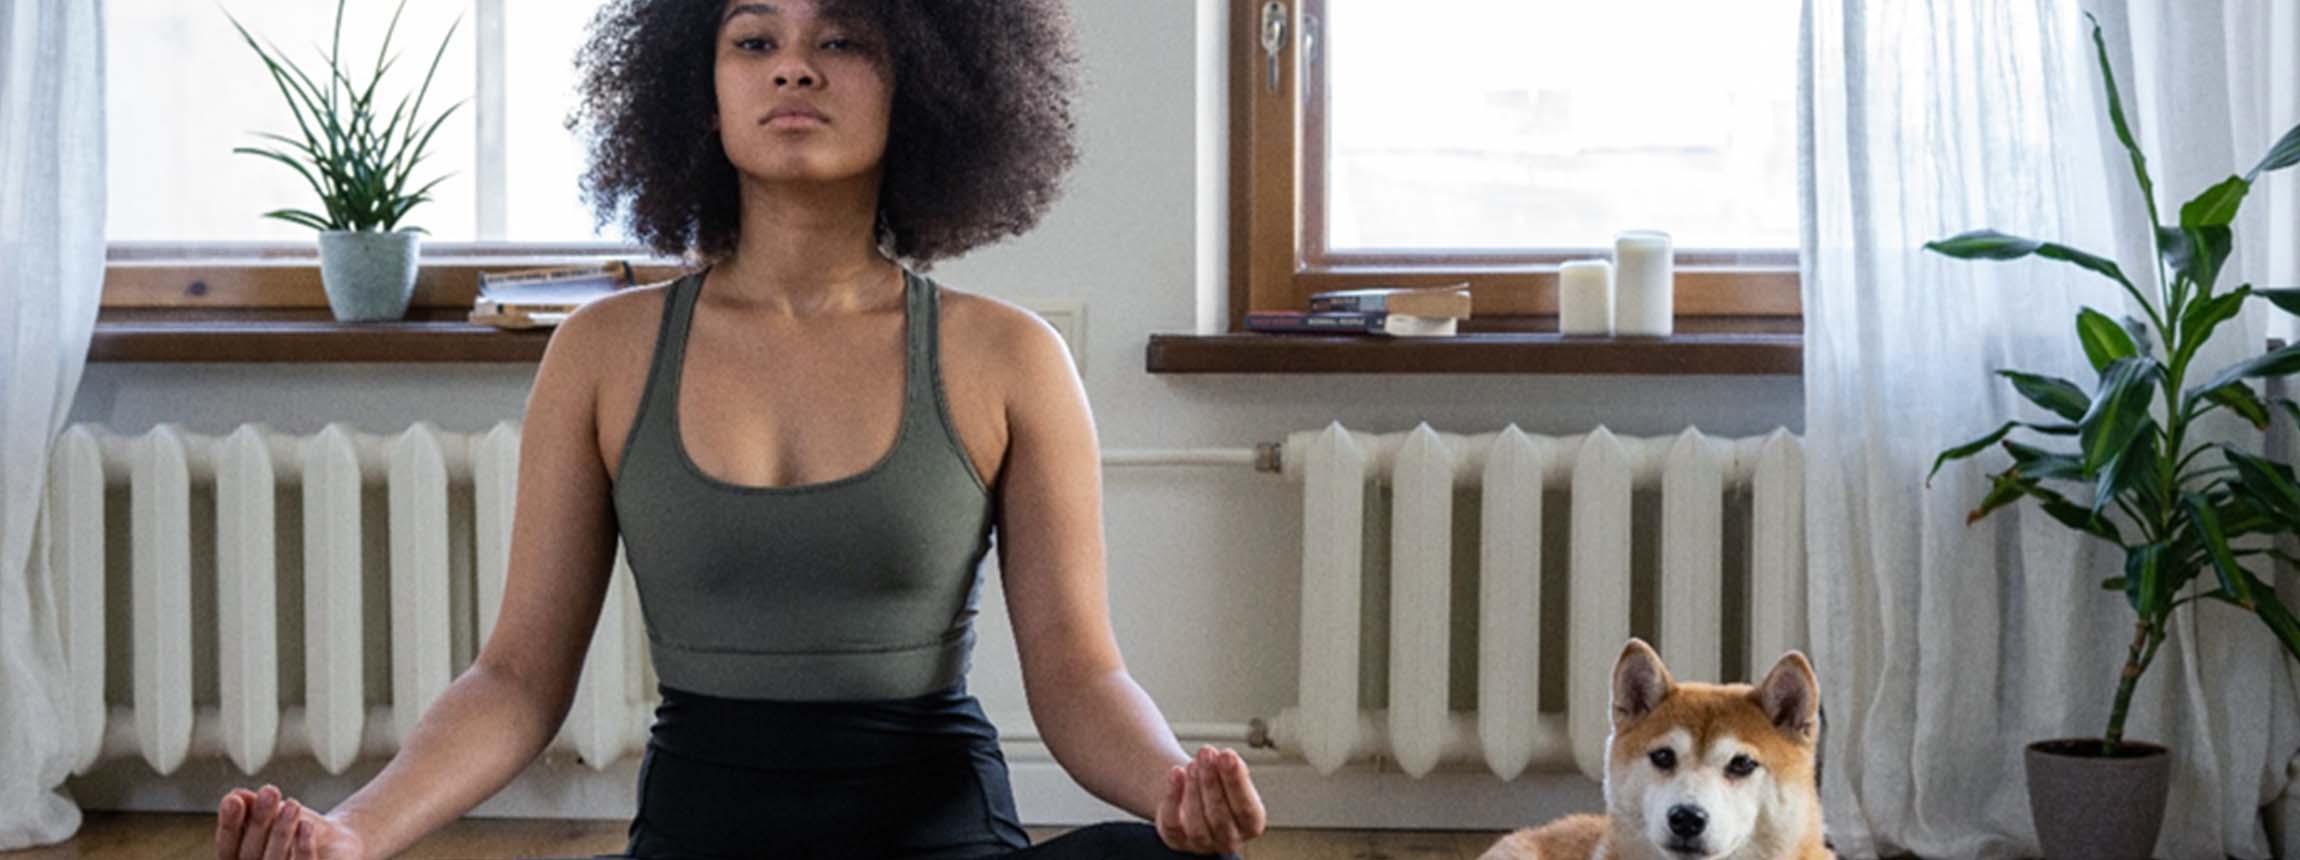 woman practices yoga with dog watching on